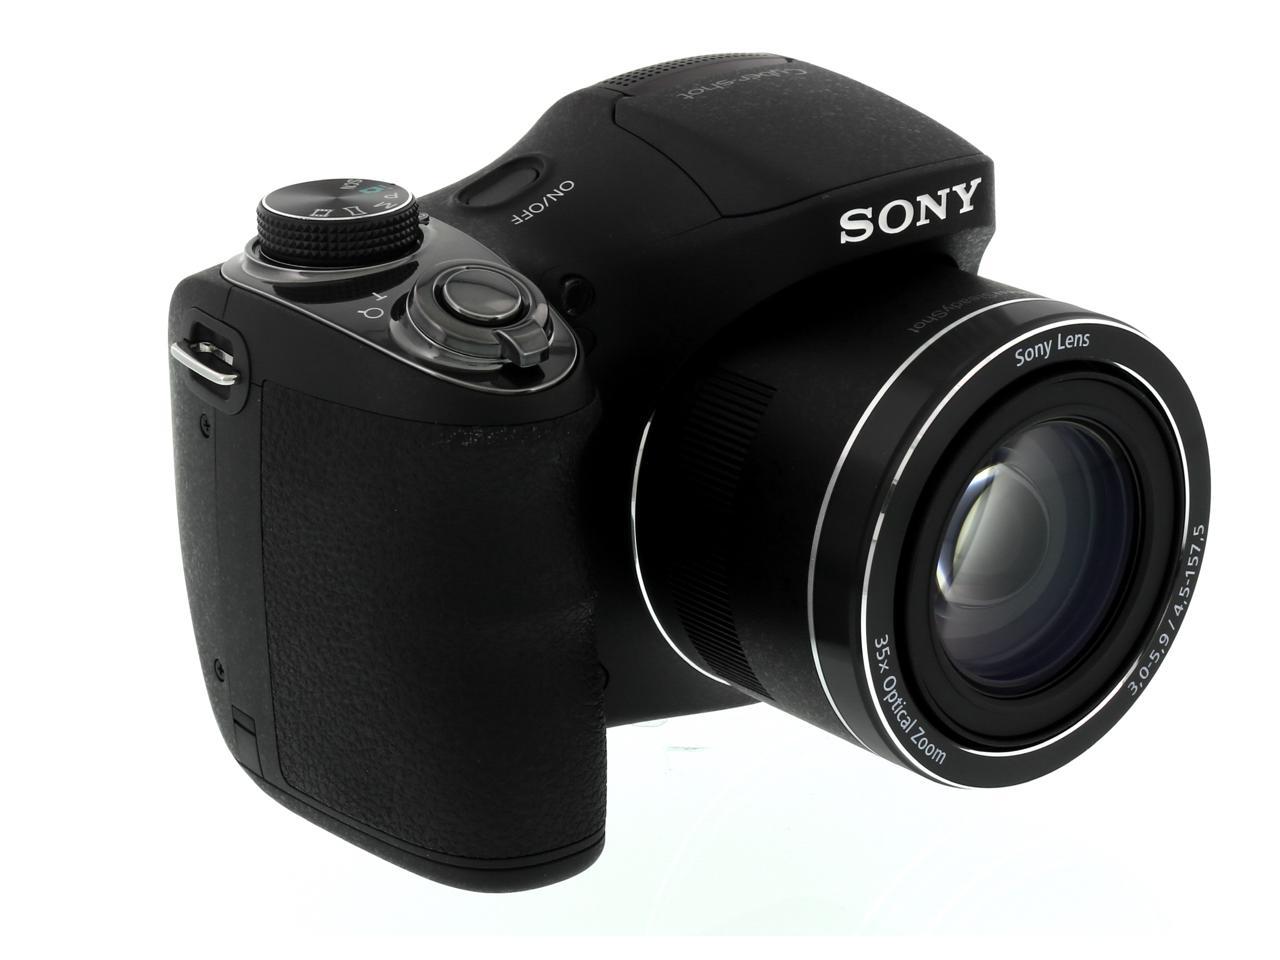 Sony Black DSC-H300 Digital Camera with 20.1 Megapixels and 35x Optical Zoom 